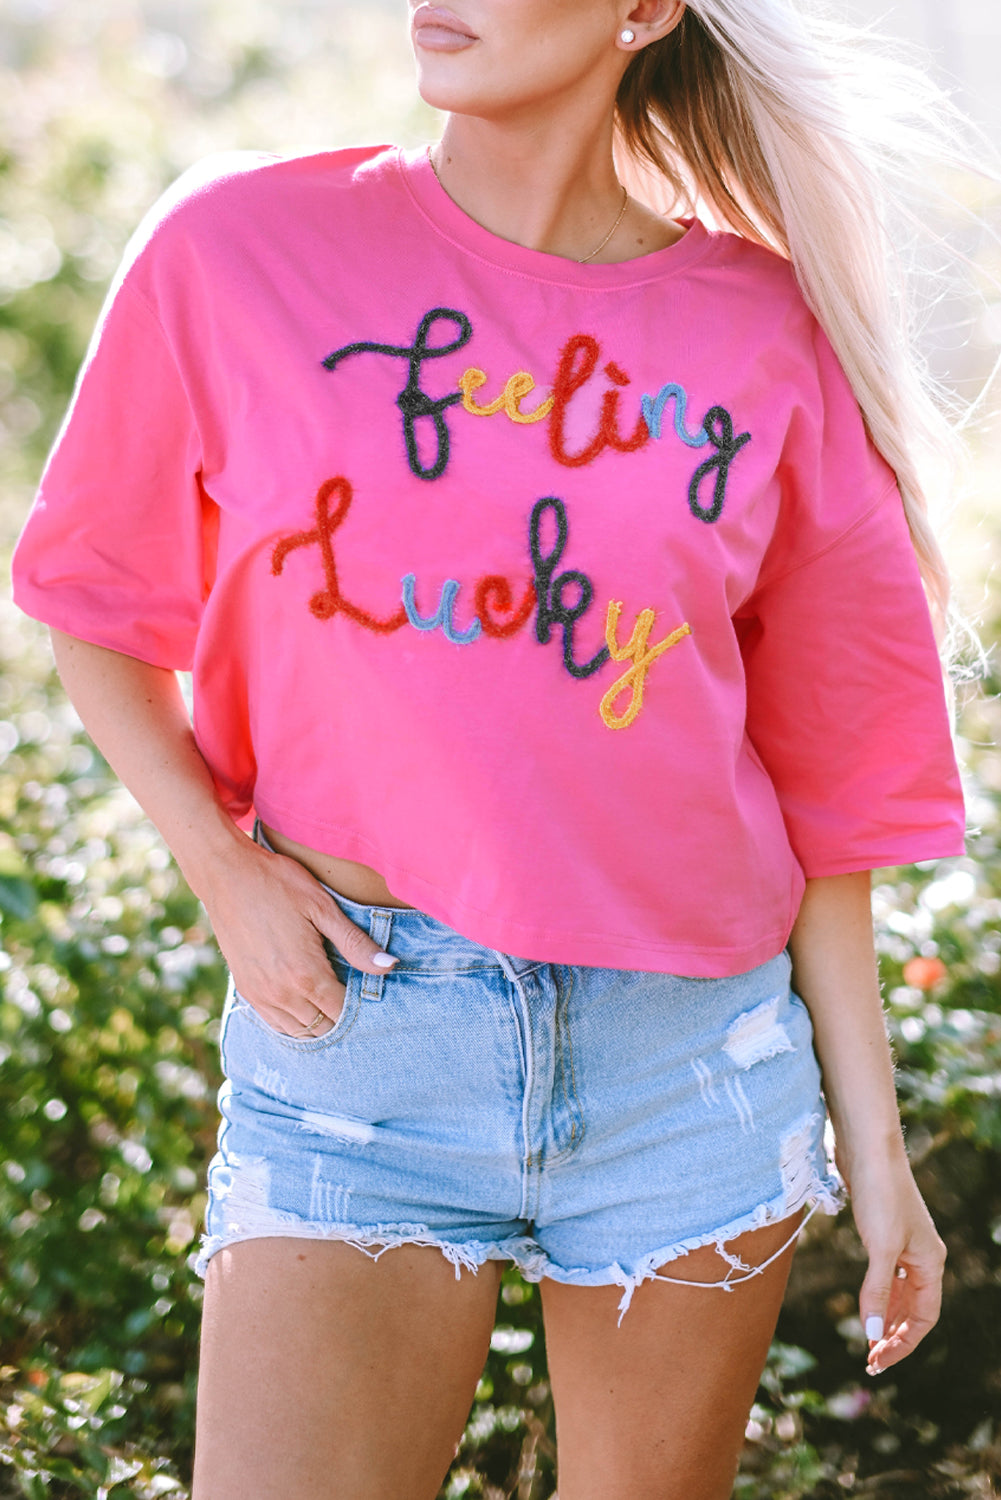 Bonbon Feeling Lucky Embroidered Letter Graphic Half Sleeve Top